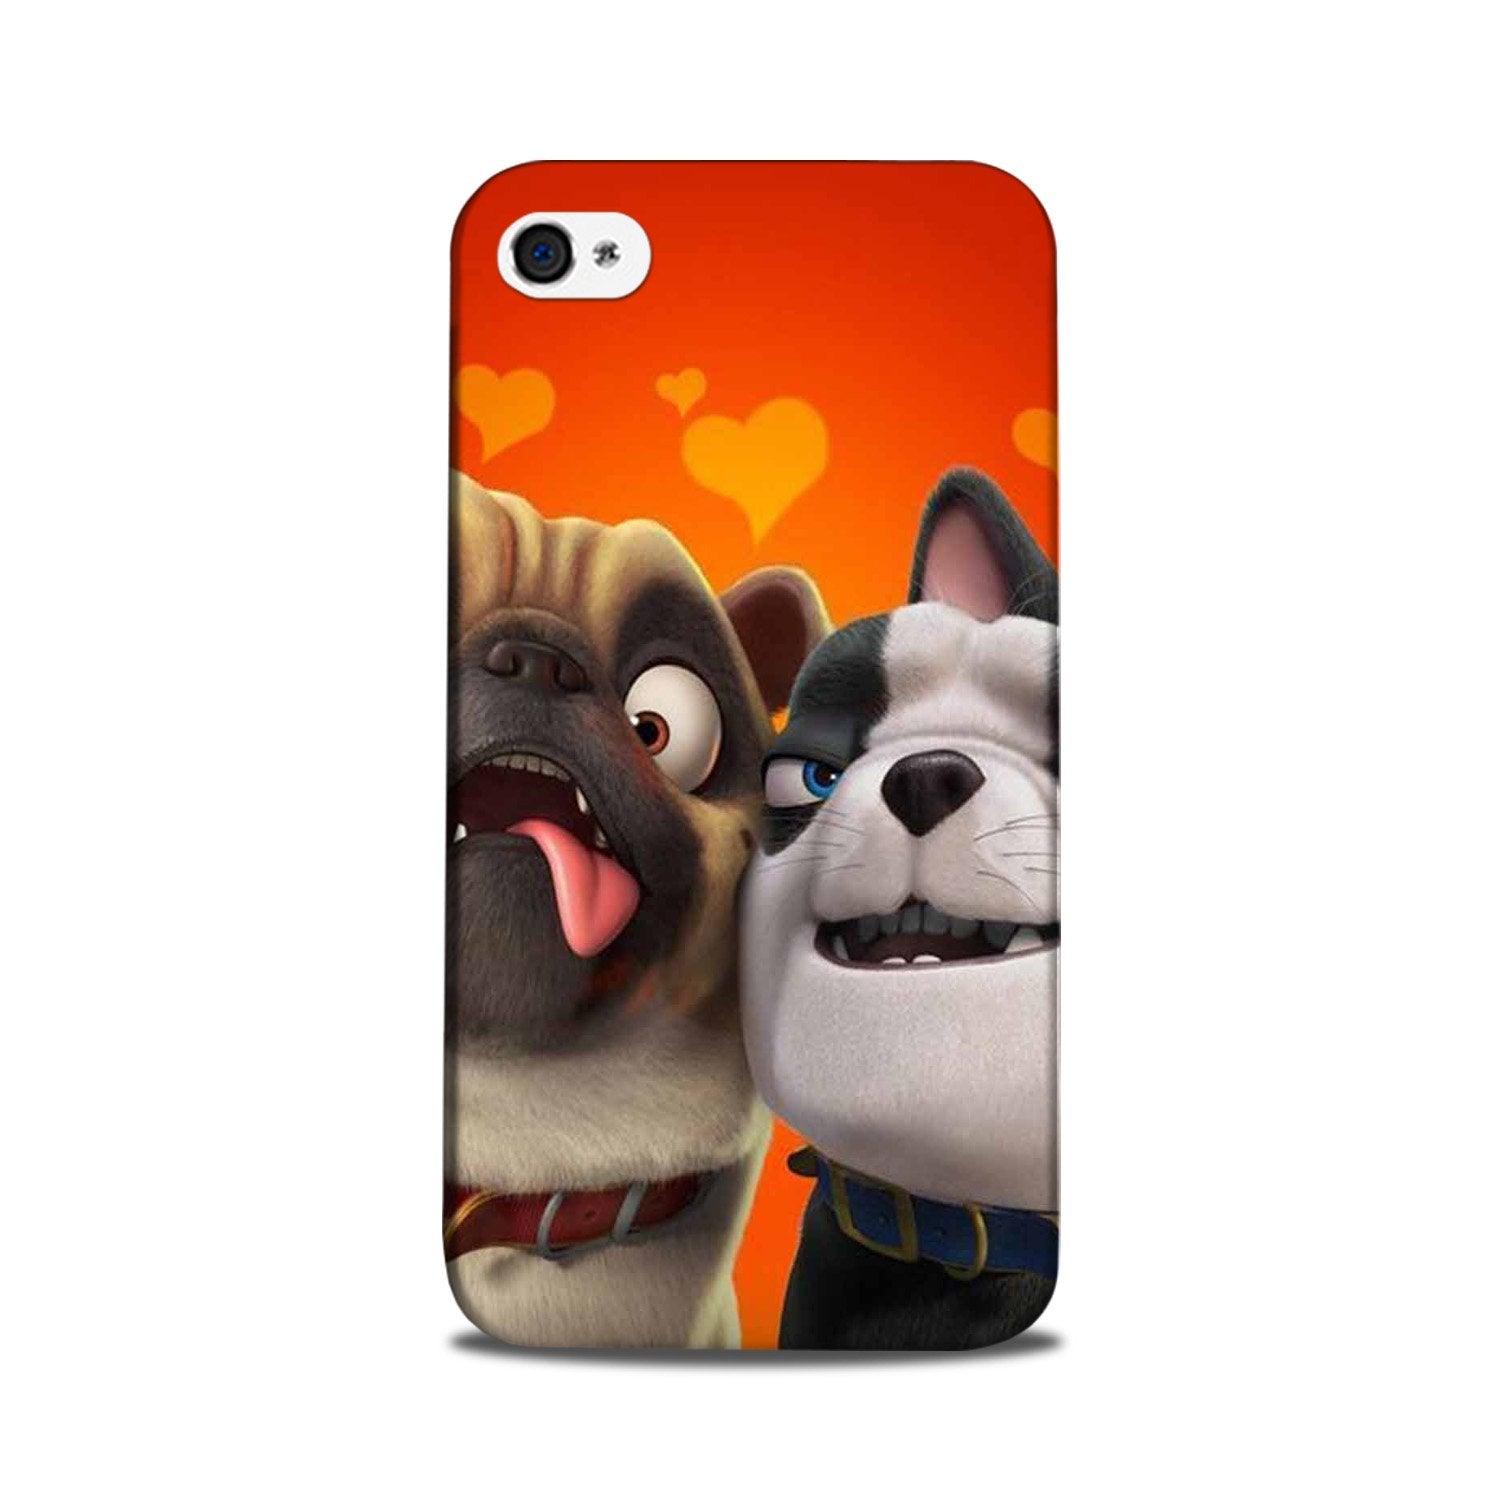 Dog Puppy Mobile Back Case for iPhone 5/ 5s  (Design - 350)